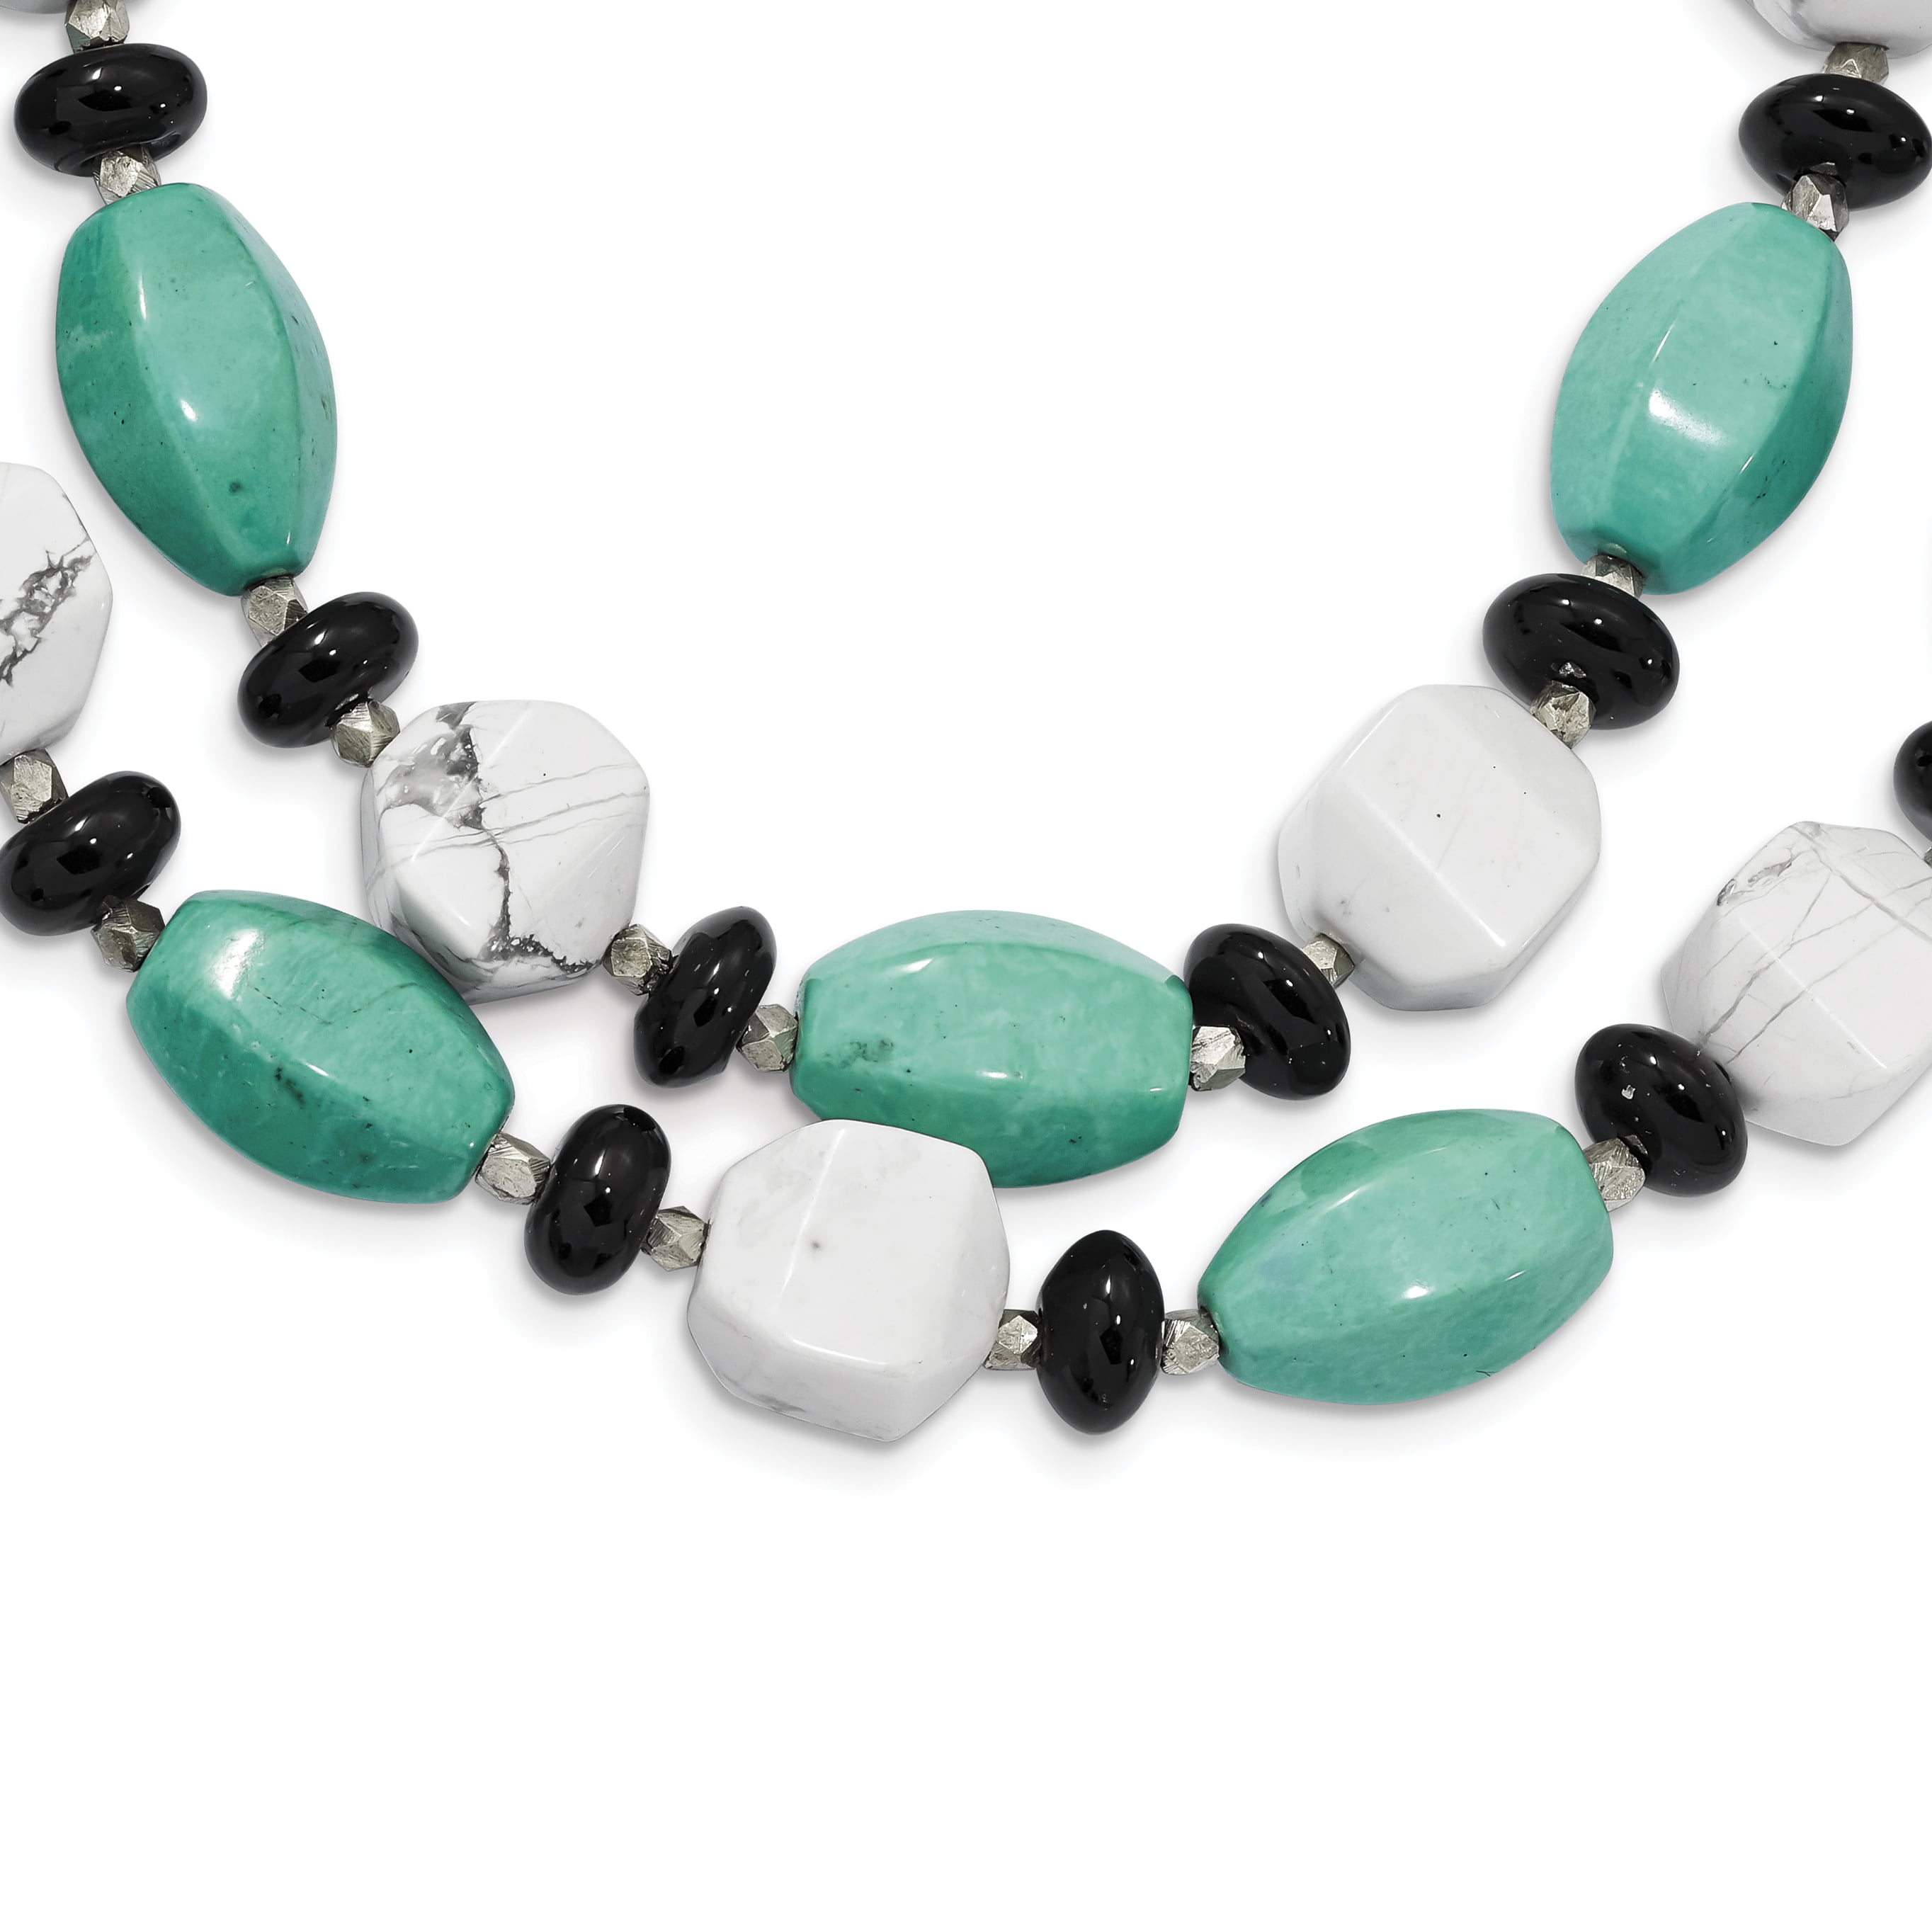 Malachite Natural Gemstone Necklace 8mm Beaded Sterling Silver 16-30inch Healing 